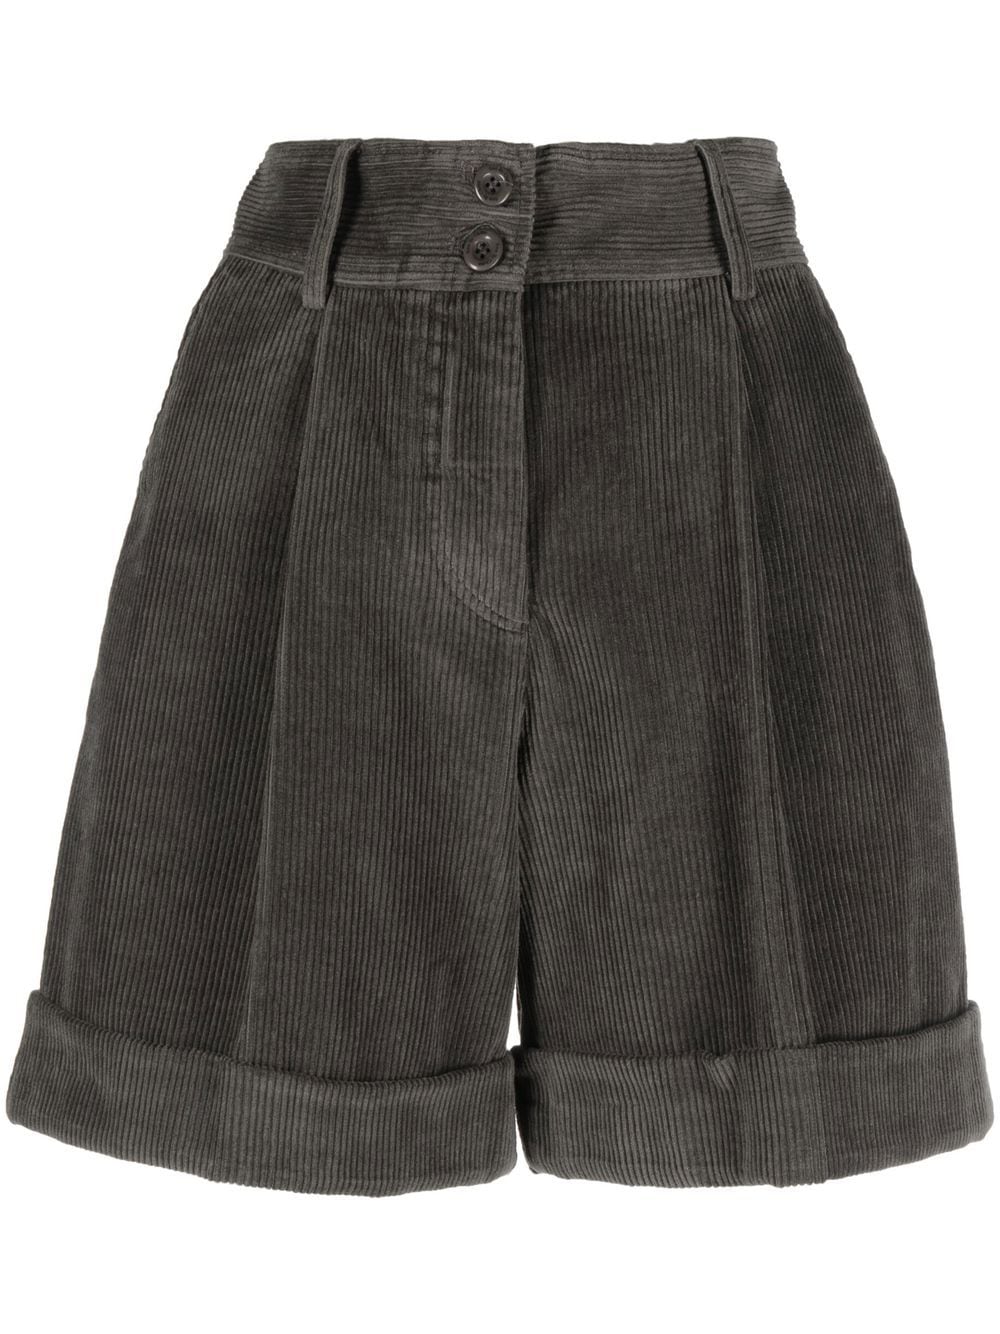 SEE BY CHLOÉ HIGH-WAISTED CORDUROY SHORTS